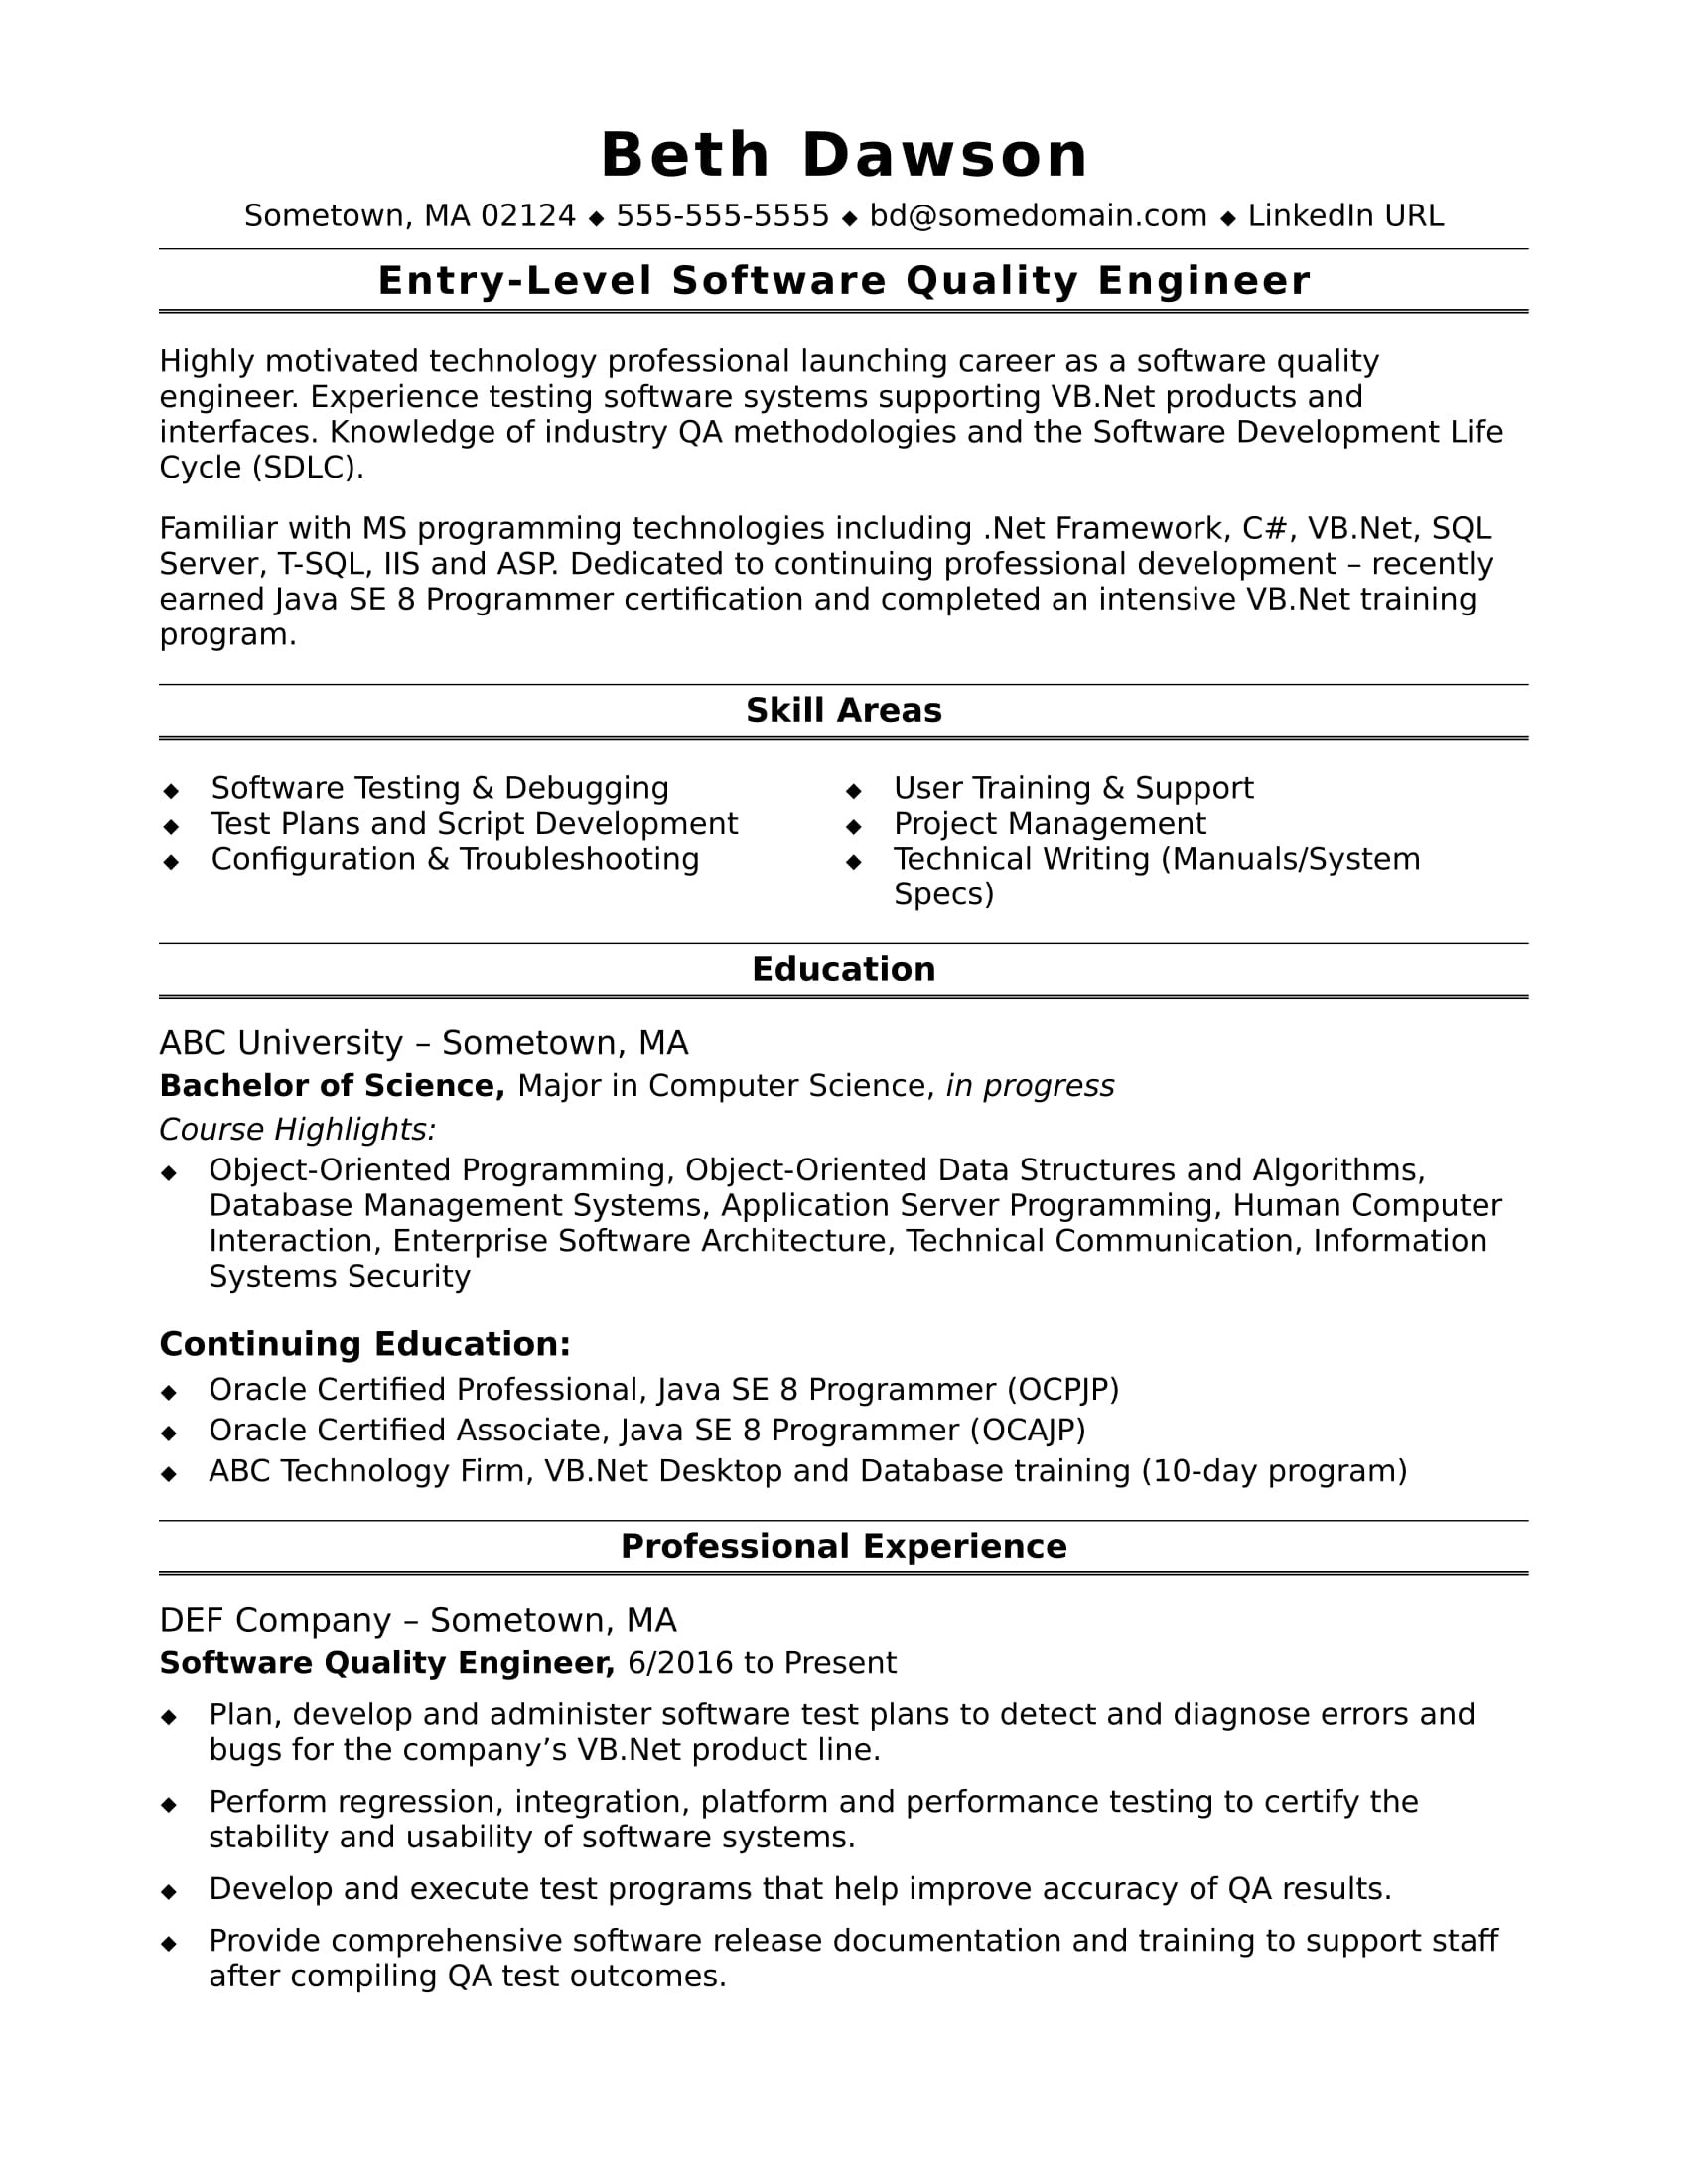 Quality assurance Engineer Resume Sample Sample Resume for An Entry Level Quality Engineer